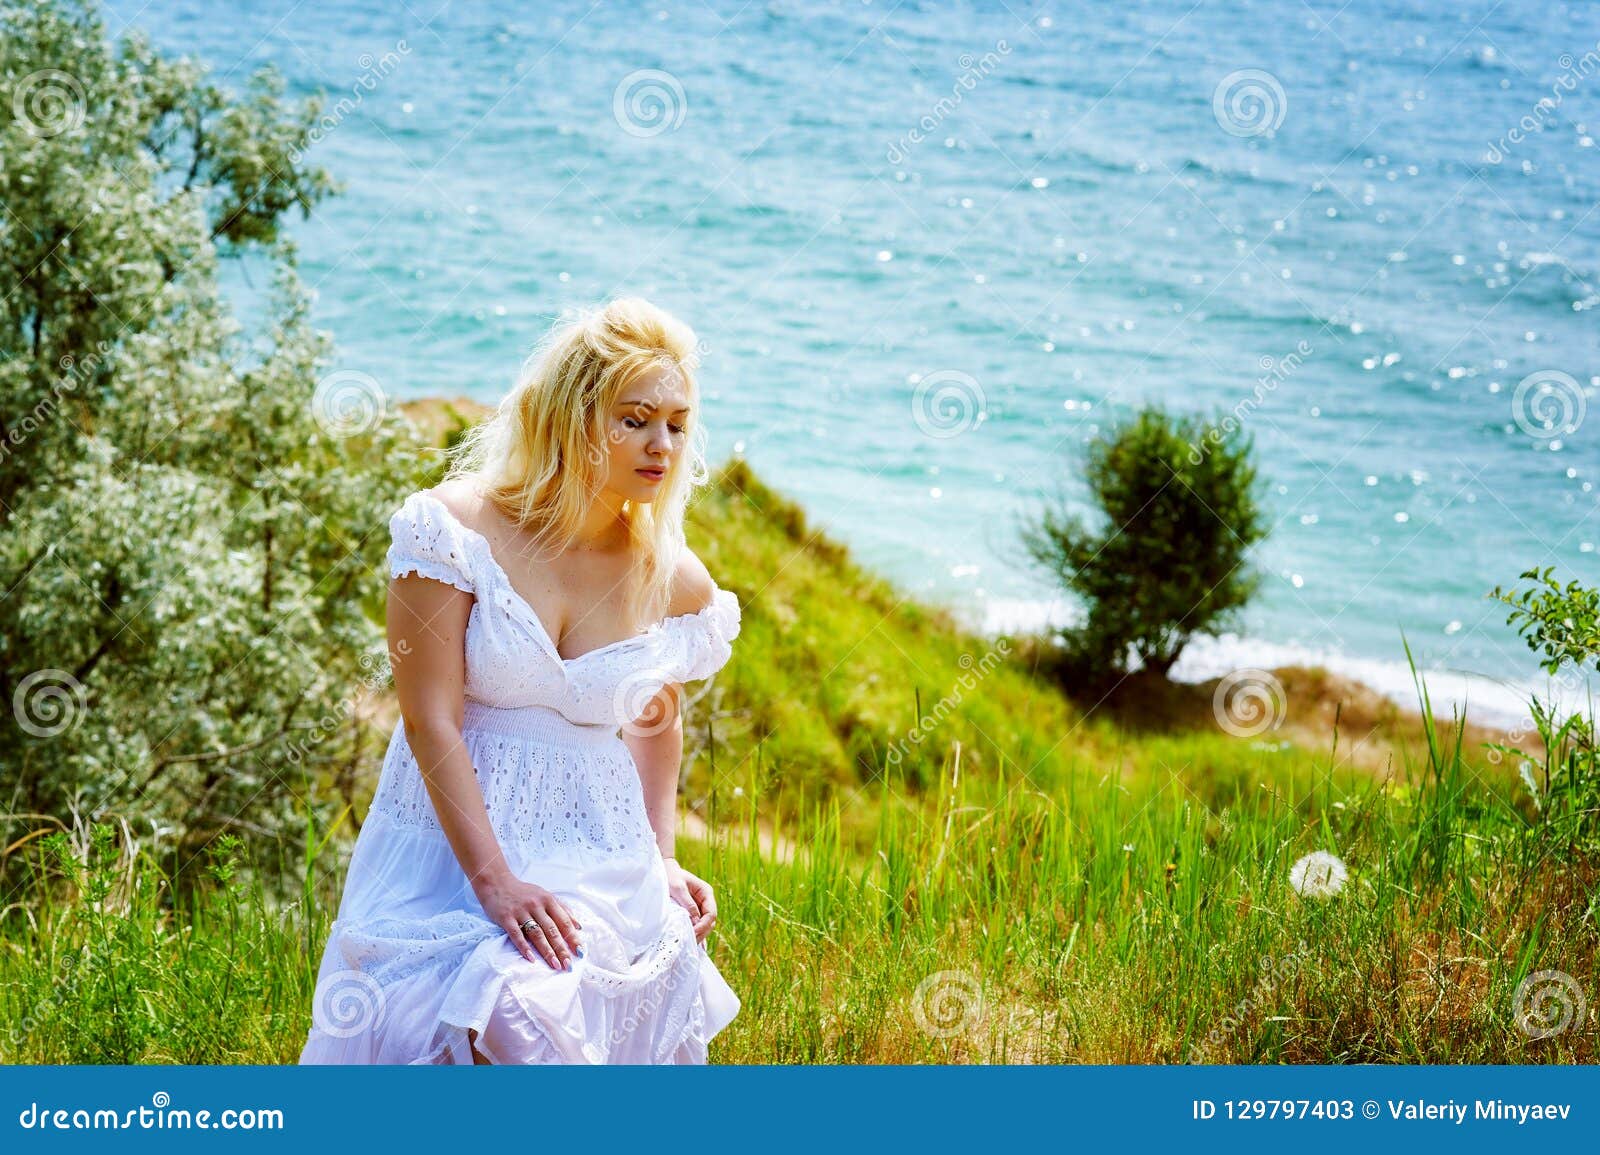 blondes women nature outdoors white dress 1600x1200 